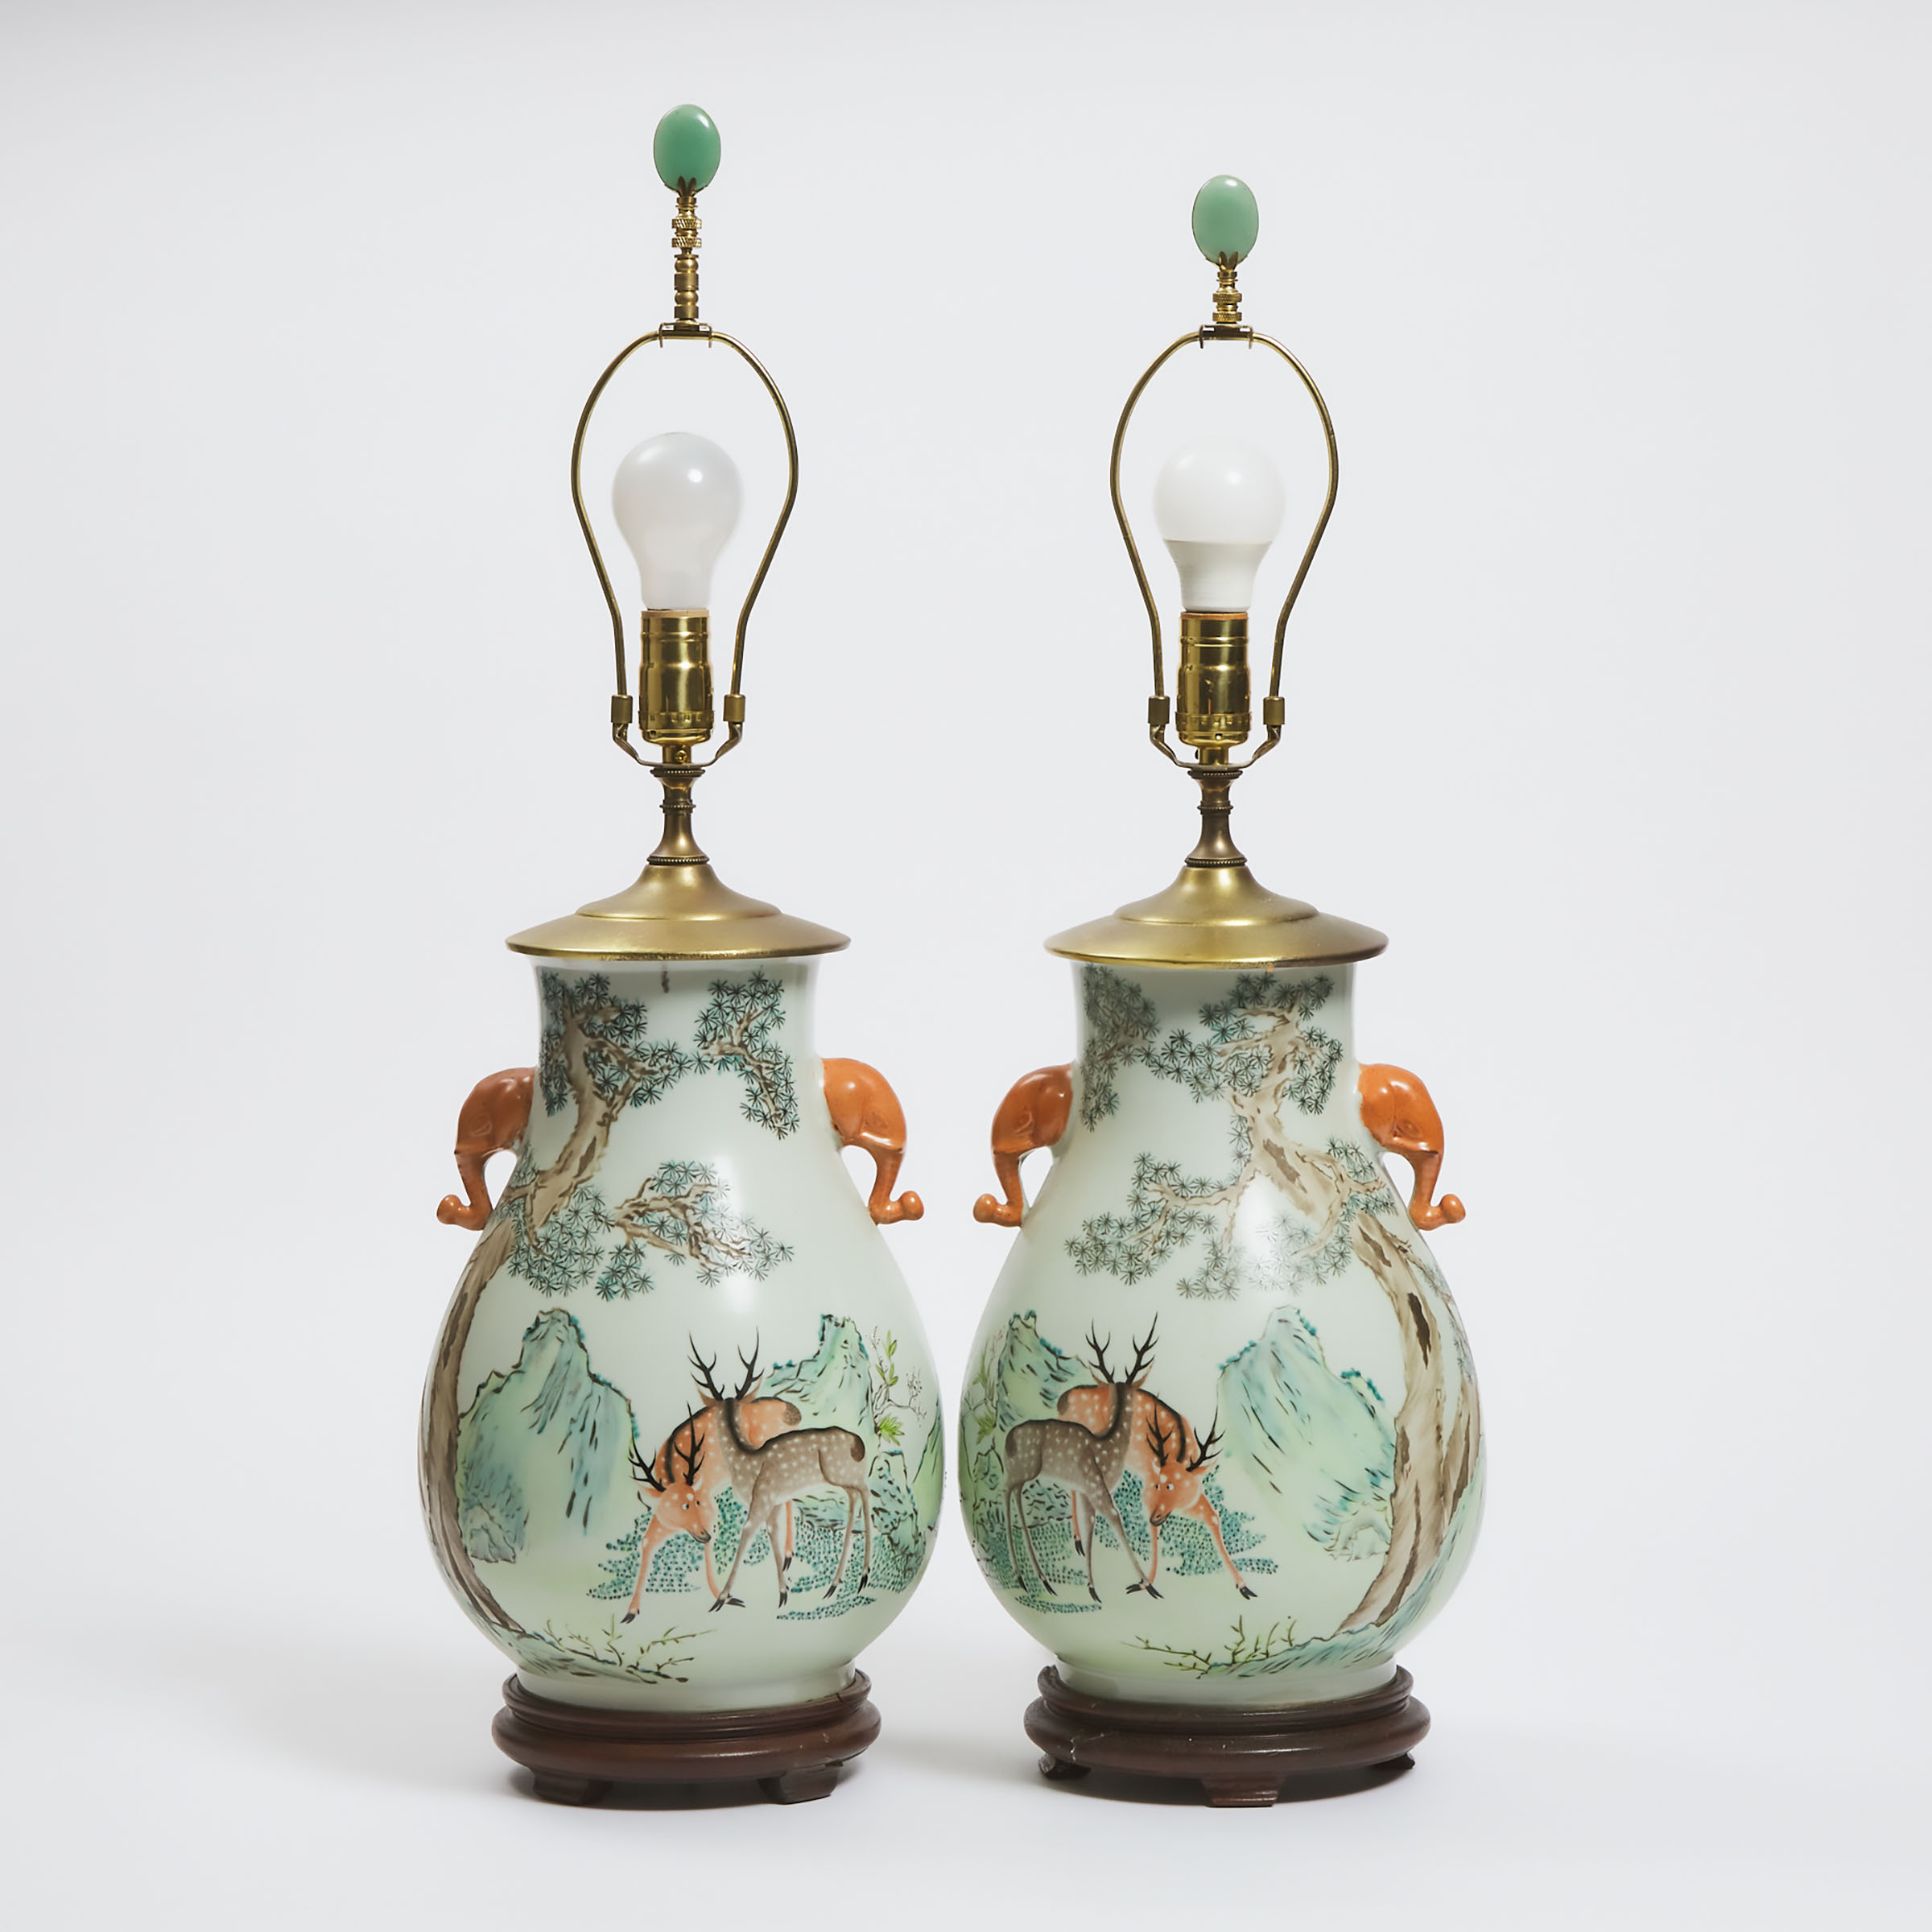 A Pair of Enameled 'Deer and Crane' Hu-Form Vase Lamps, Republican Period